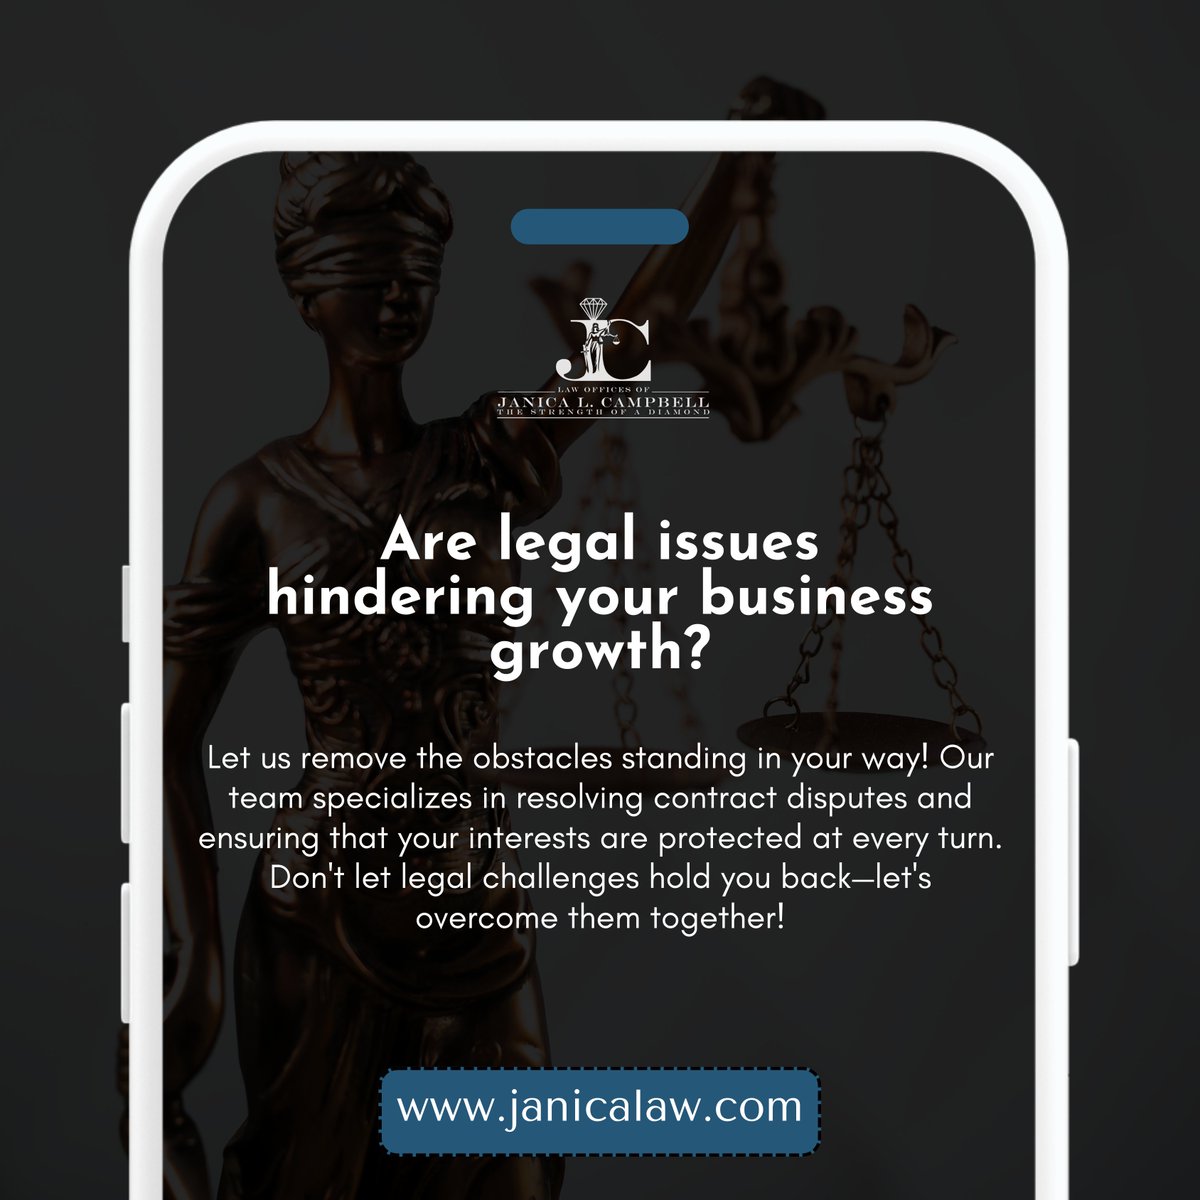 🚀 Are legal issues hindering your business growth? 🚀 Let us remove the obstacles standing in your way! Our team specializes in resolving contract disputes and ensuring that your interests are protected at every turn. 

#LegalServices #ContractLaw #BusinessLaw #LegalAdvice